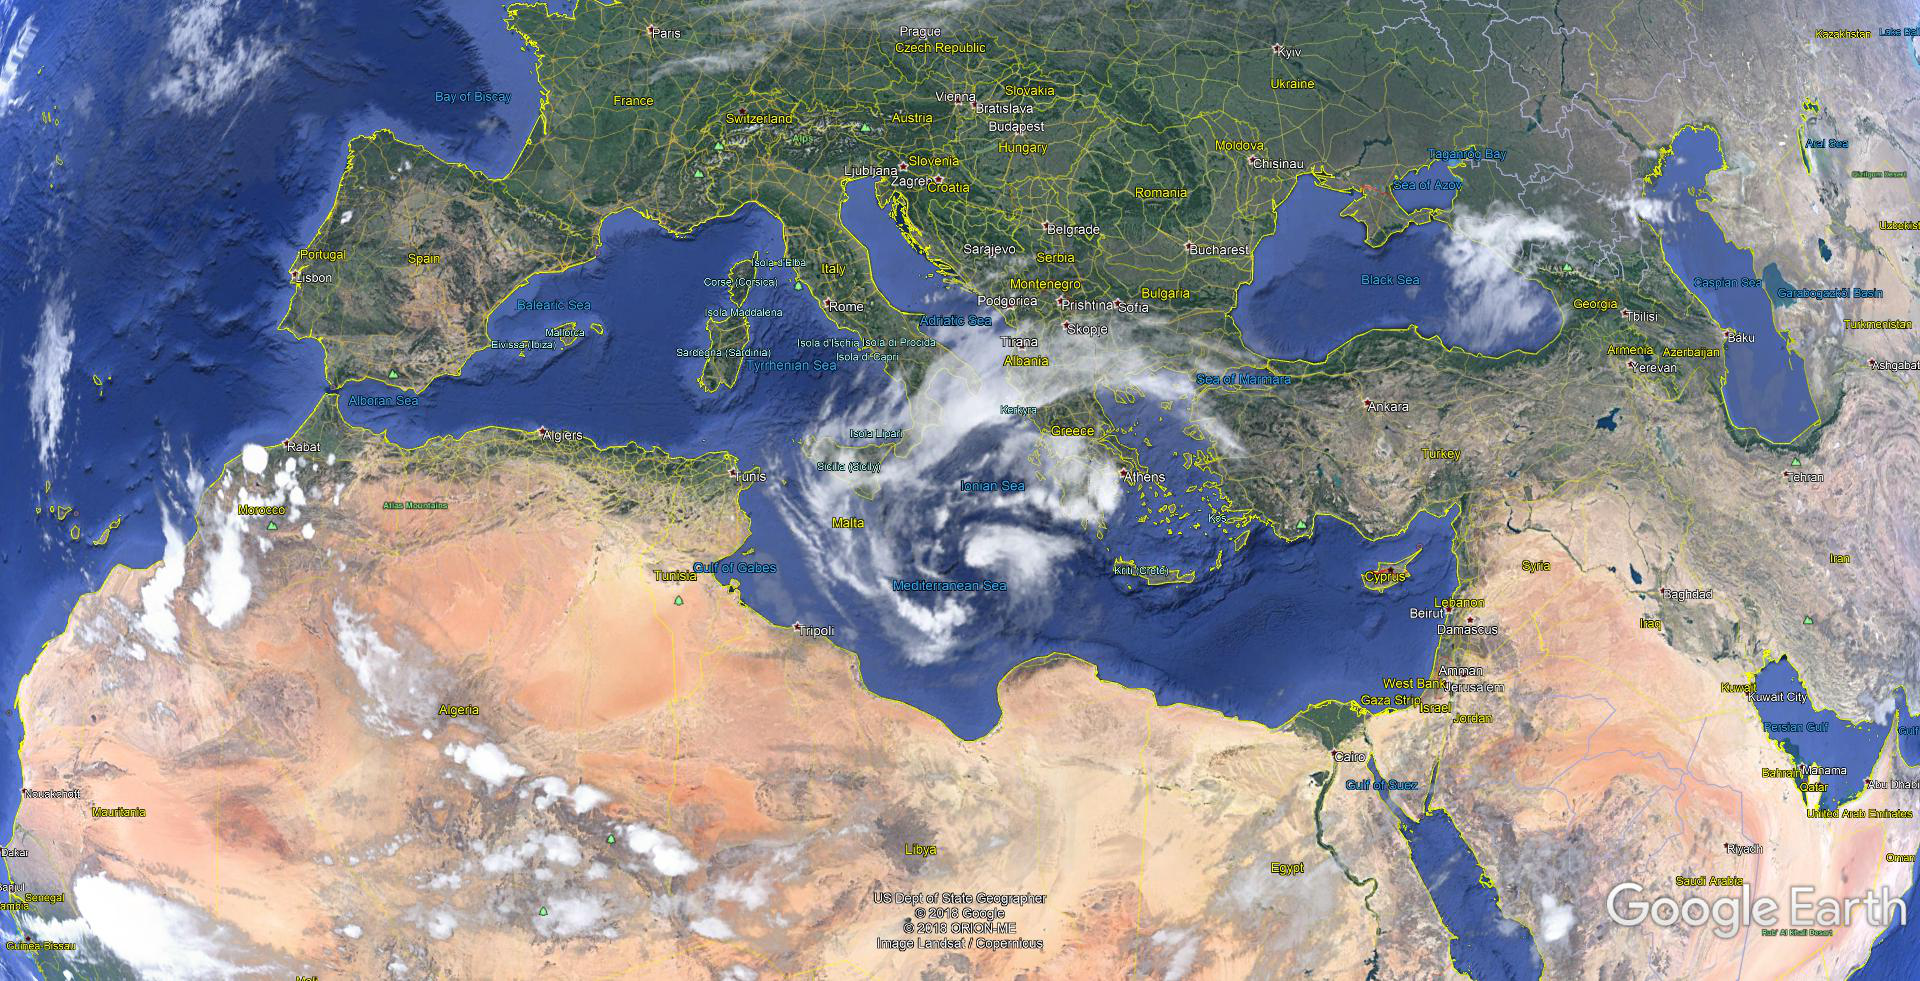 An uncommon storm called a ‘Medicane’ is headed for Greece